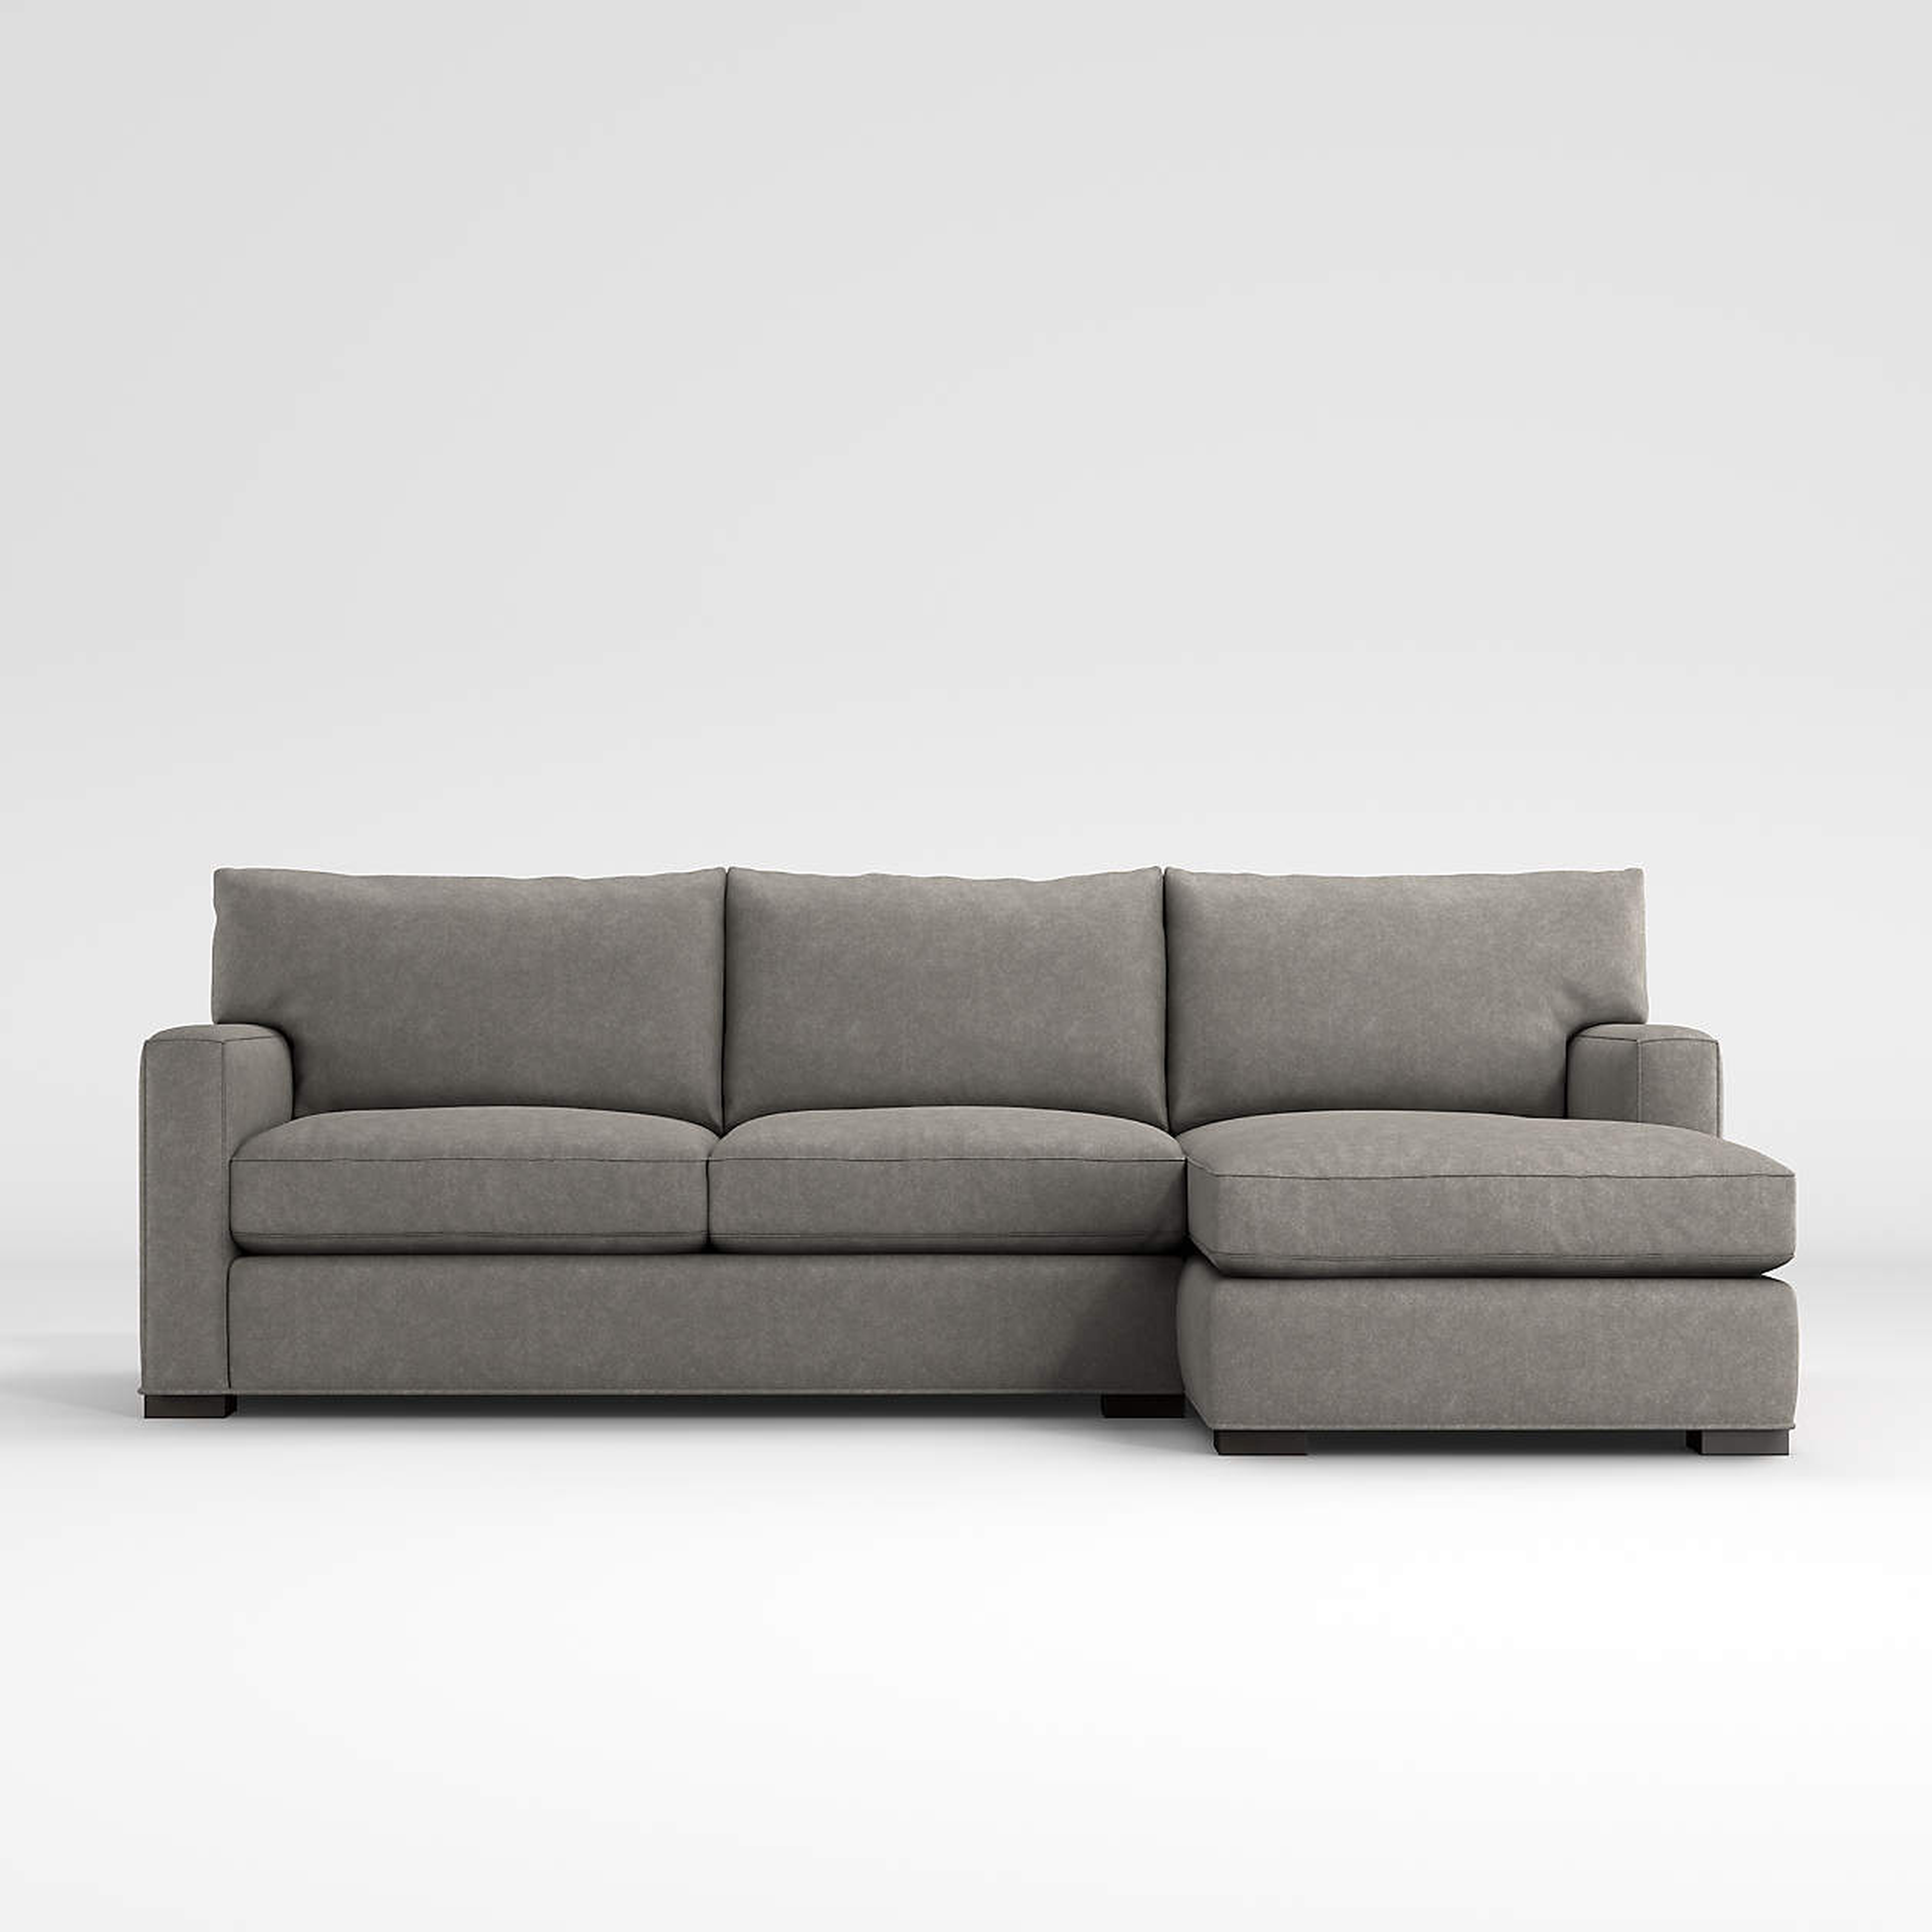 Axis 2-Piece Sectional Sofa - Crate and Barrel